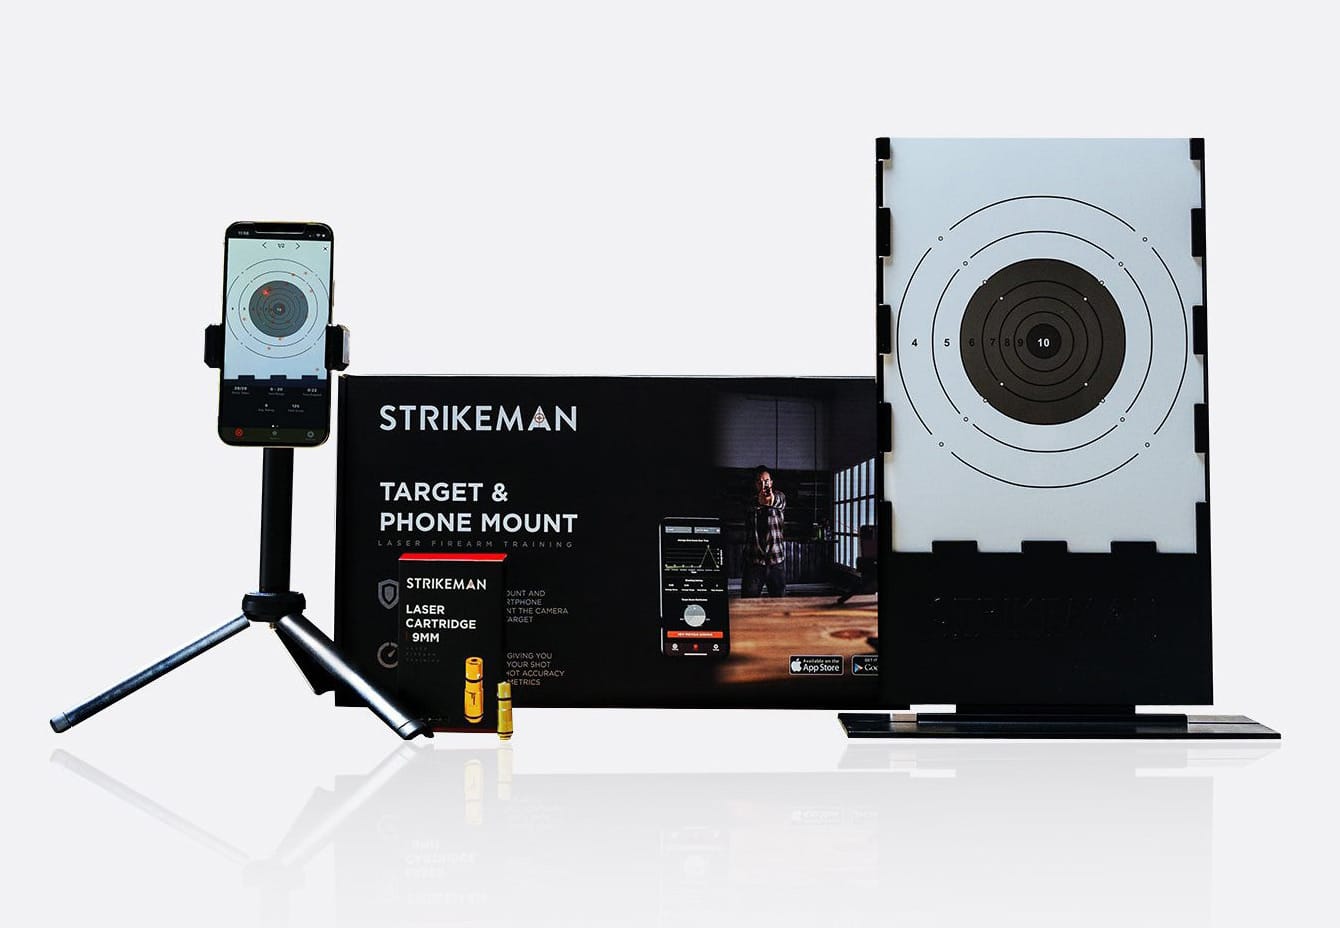 Contents of the Strikeman Laser Training System kit